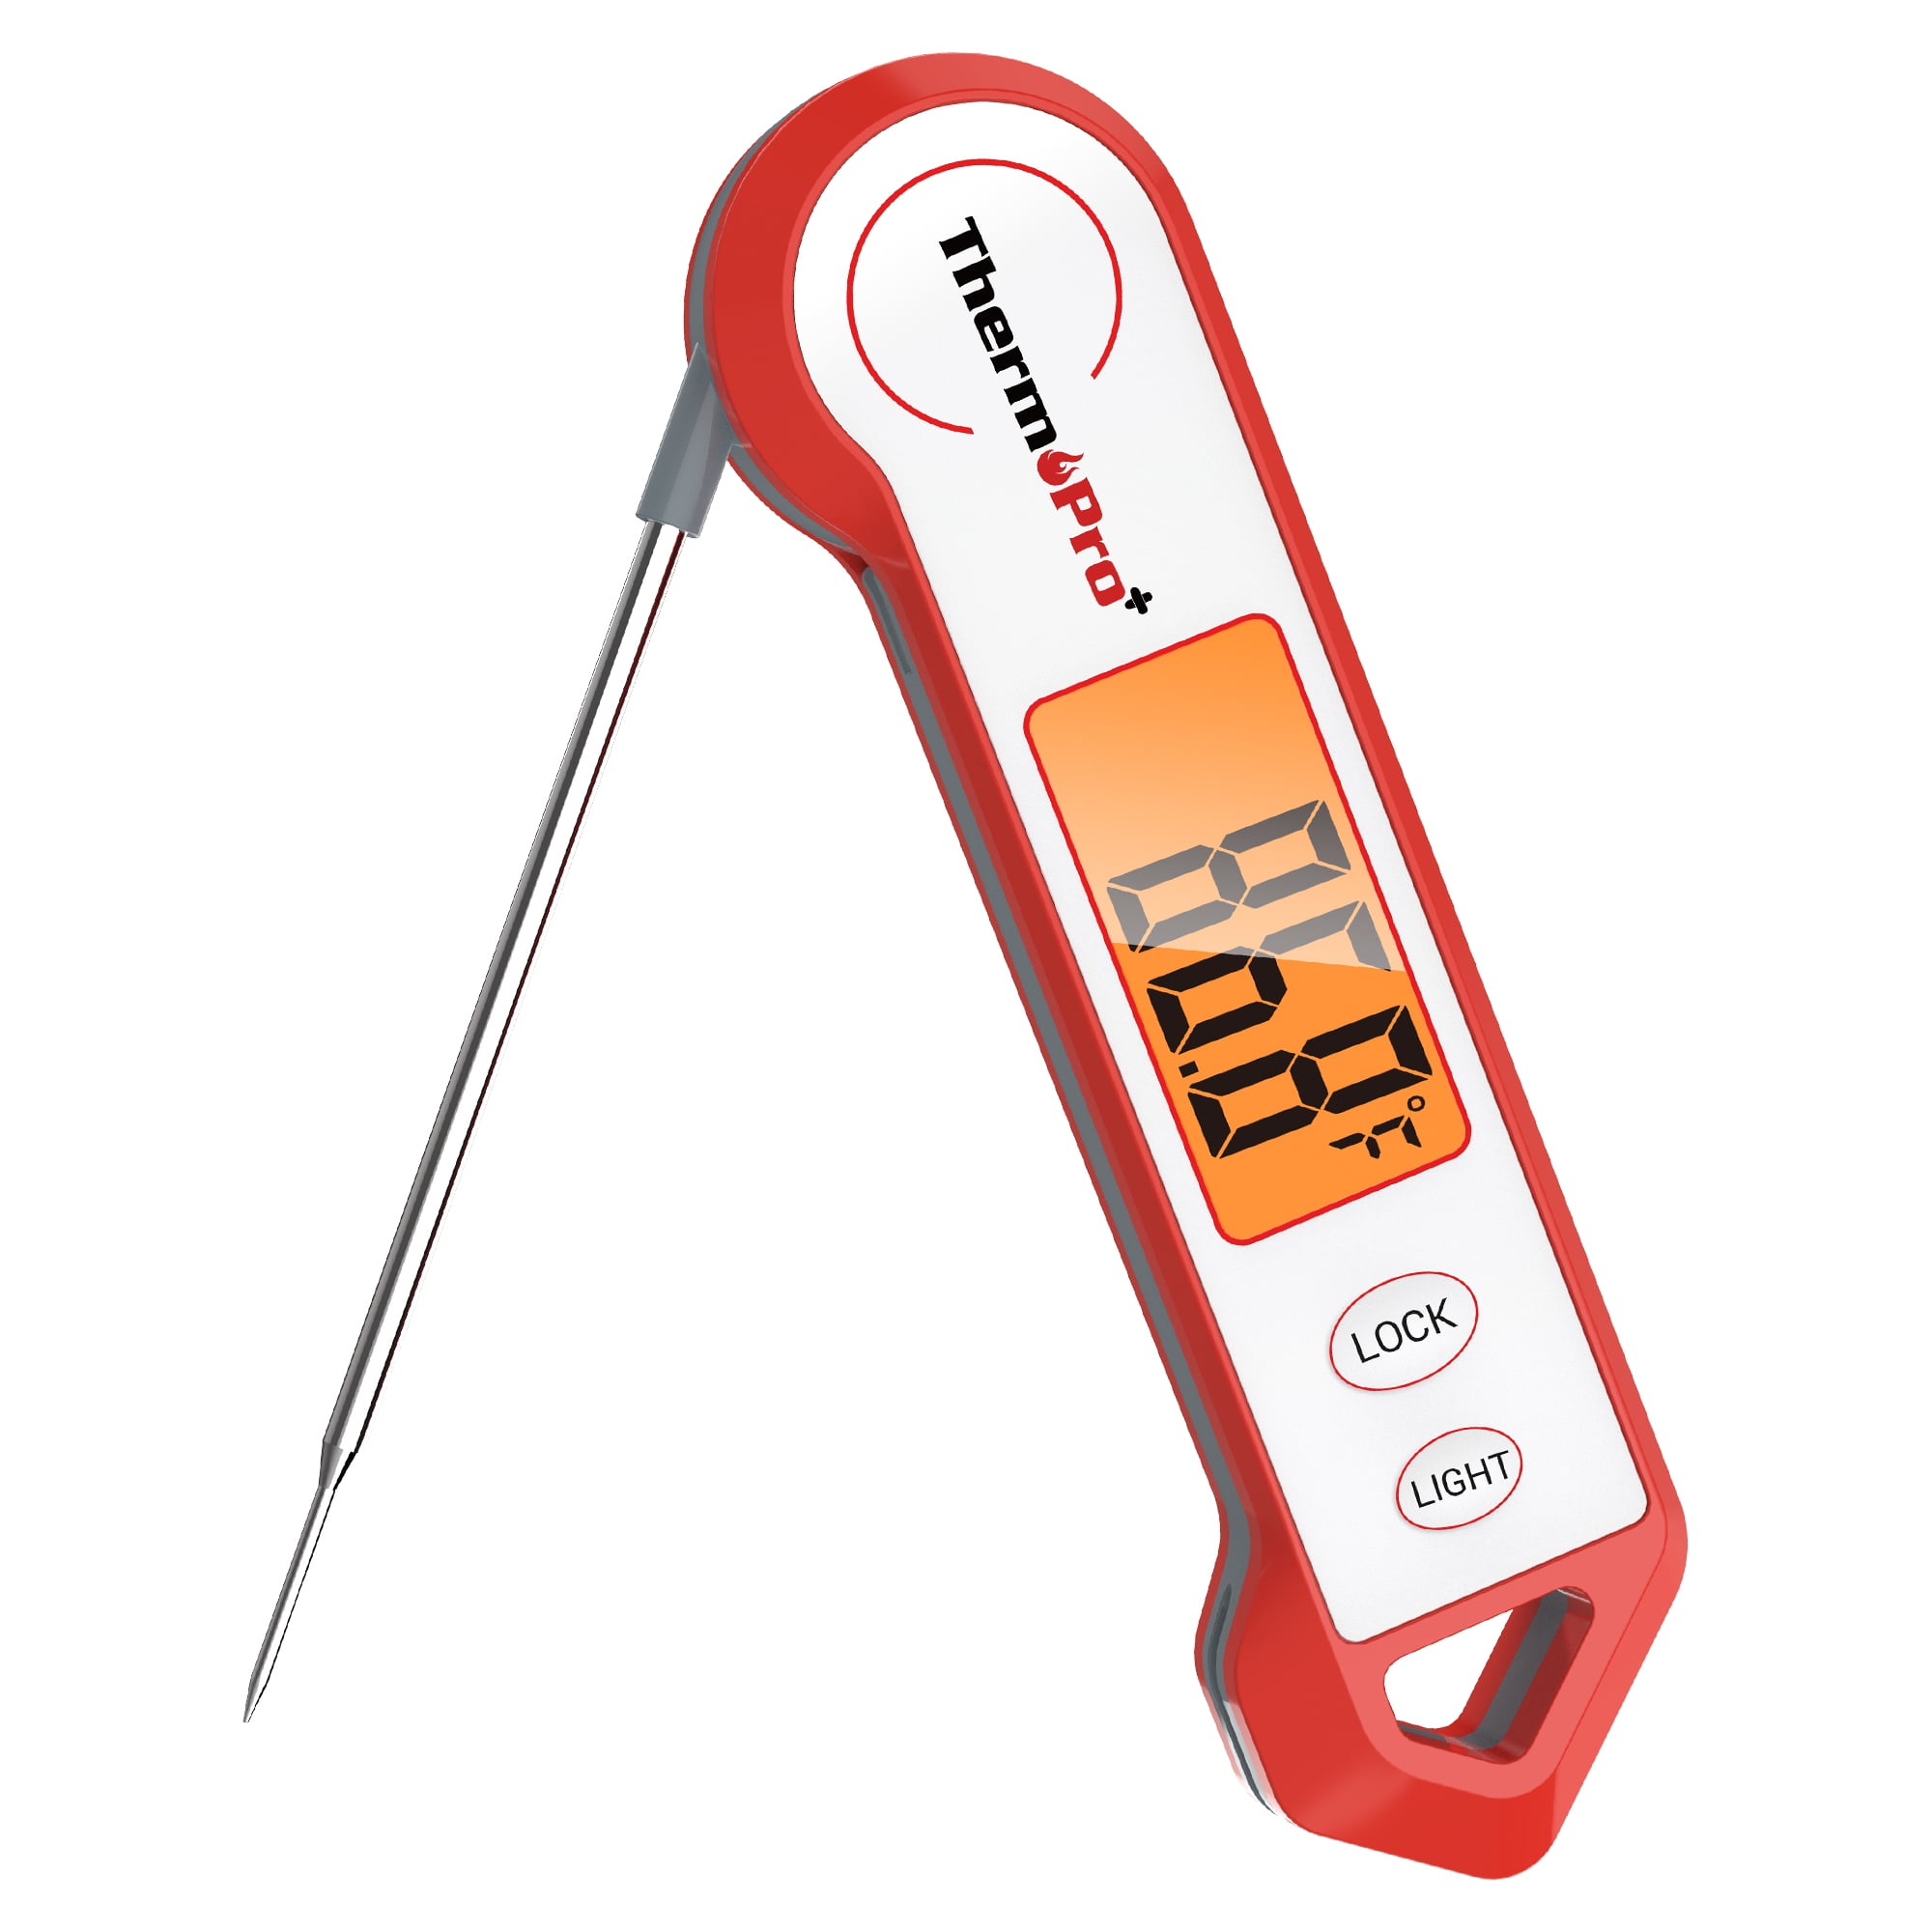 ThermoPro TP19HW Waterproof Digital Meat Thermometer, Food Candy Cooking Grill Kitchen Thermometer with Magnet and LED Display for Oil Deep Fry Smoker